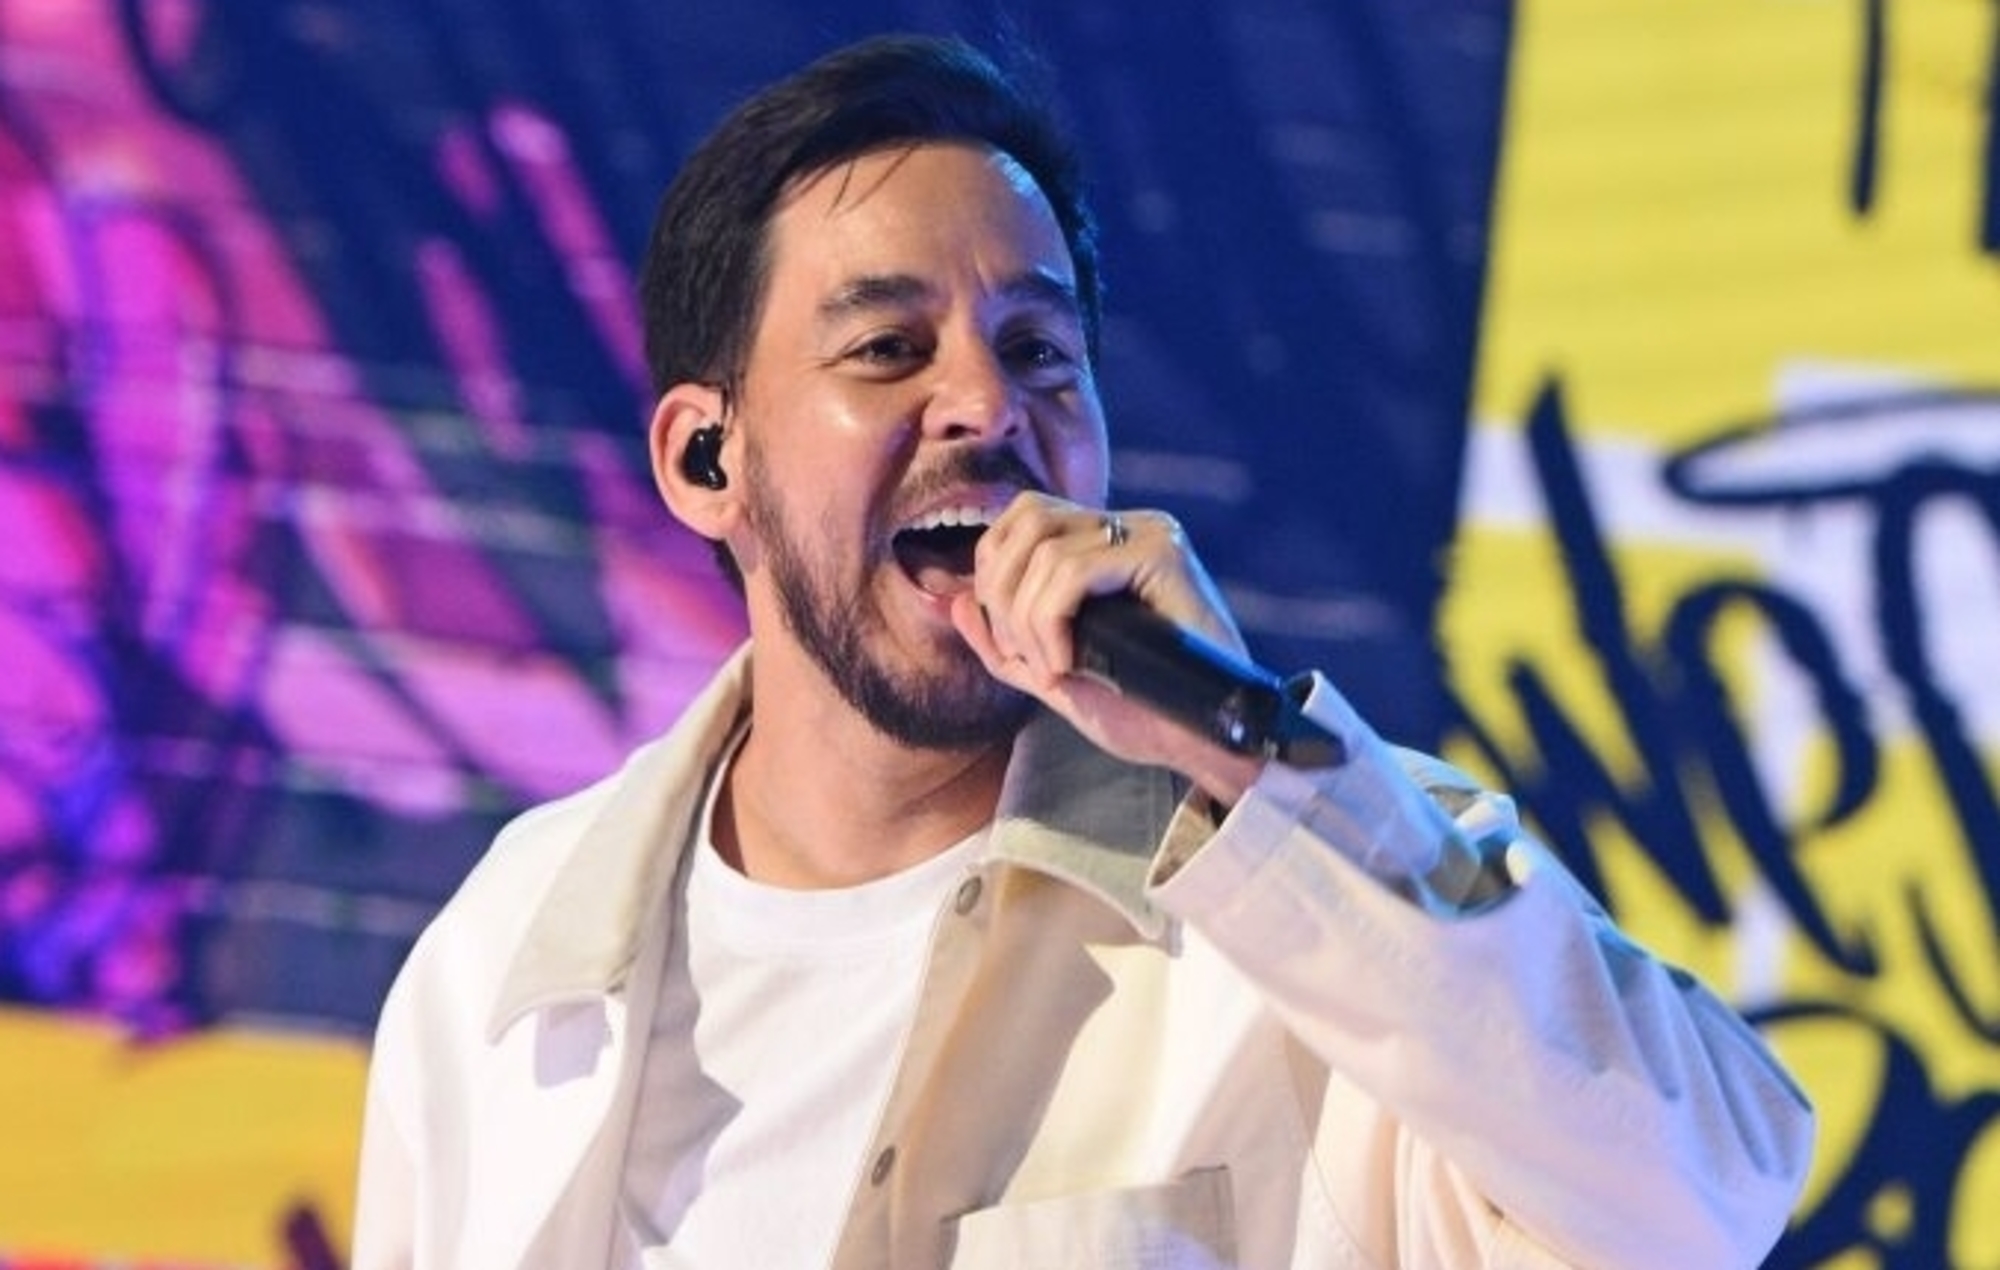 Linkin Park’s Mike Shinoda Has A New Solo Song On “Scream VI”